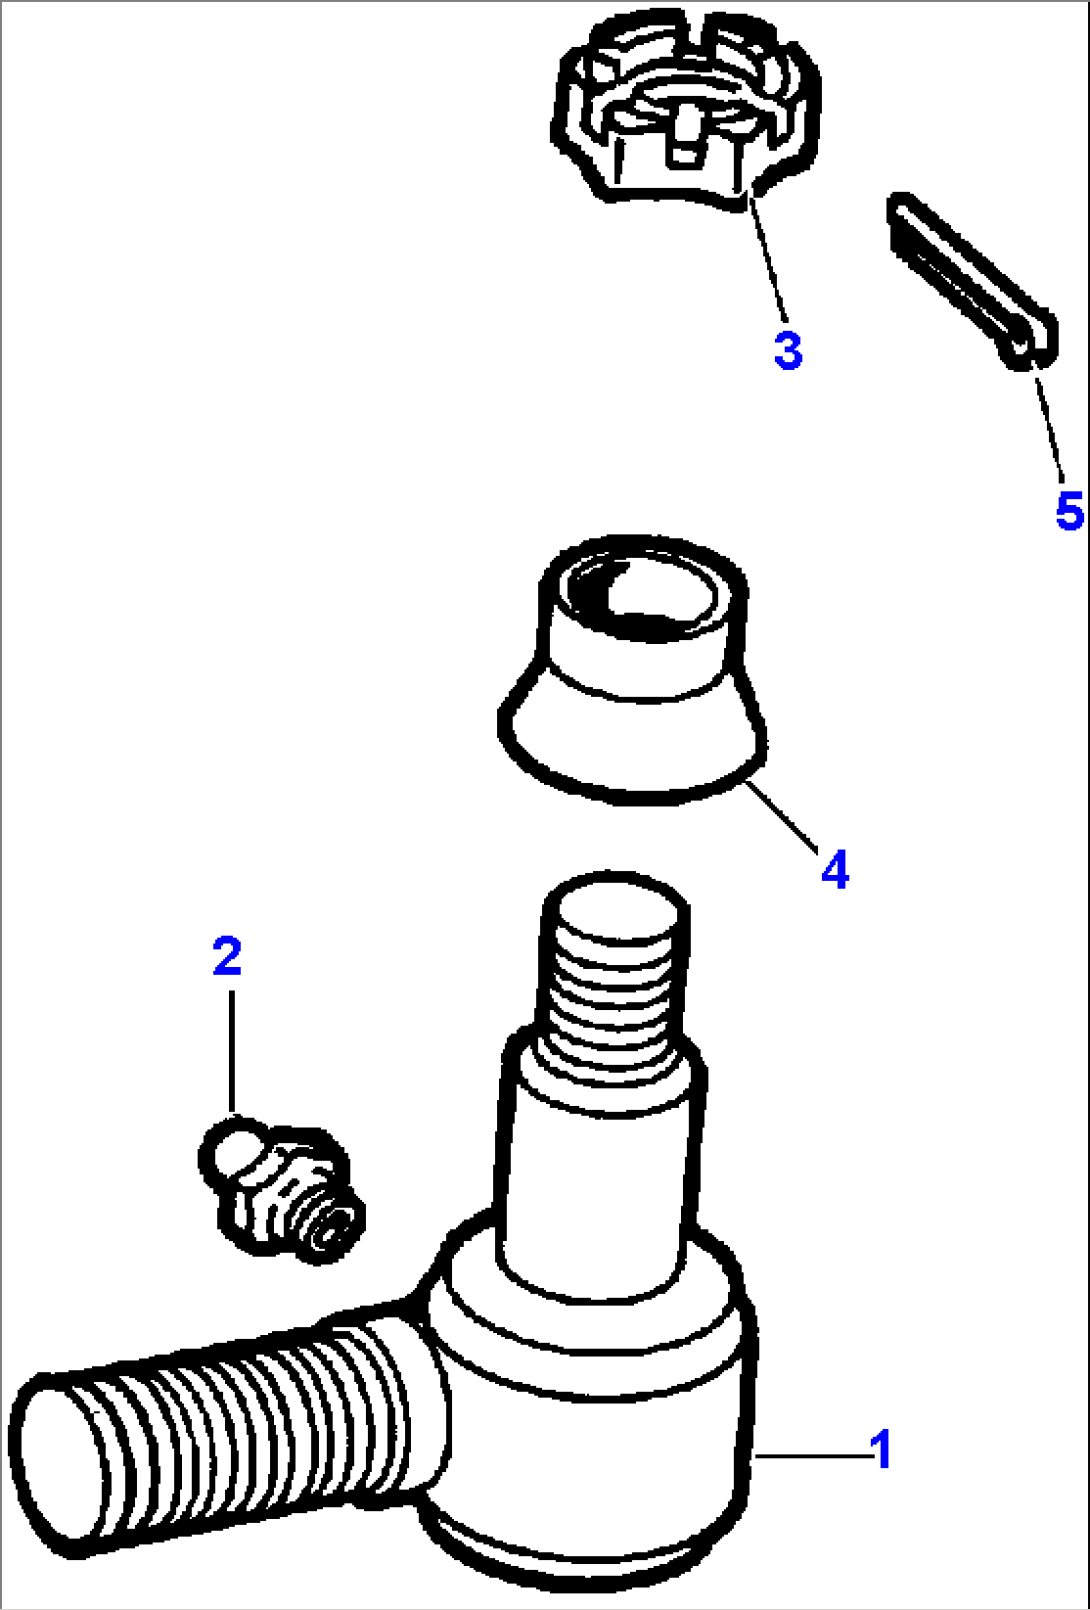 R.H. SOCKET ASSEMBLY (OPTIONAL WITH 1123 775 C91)